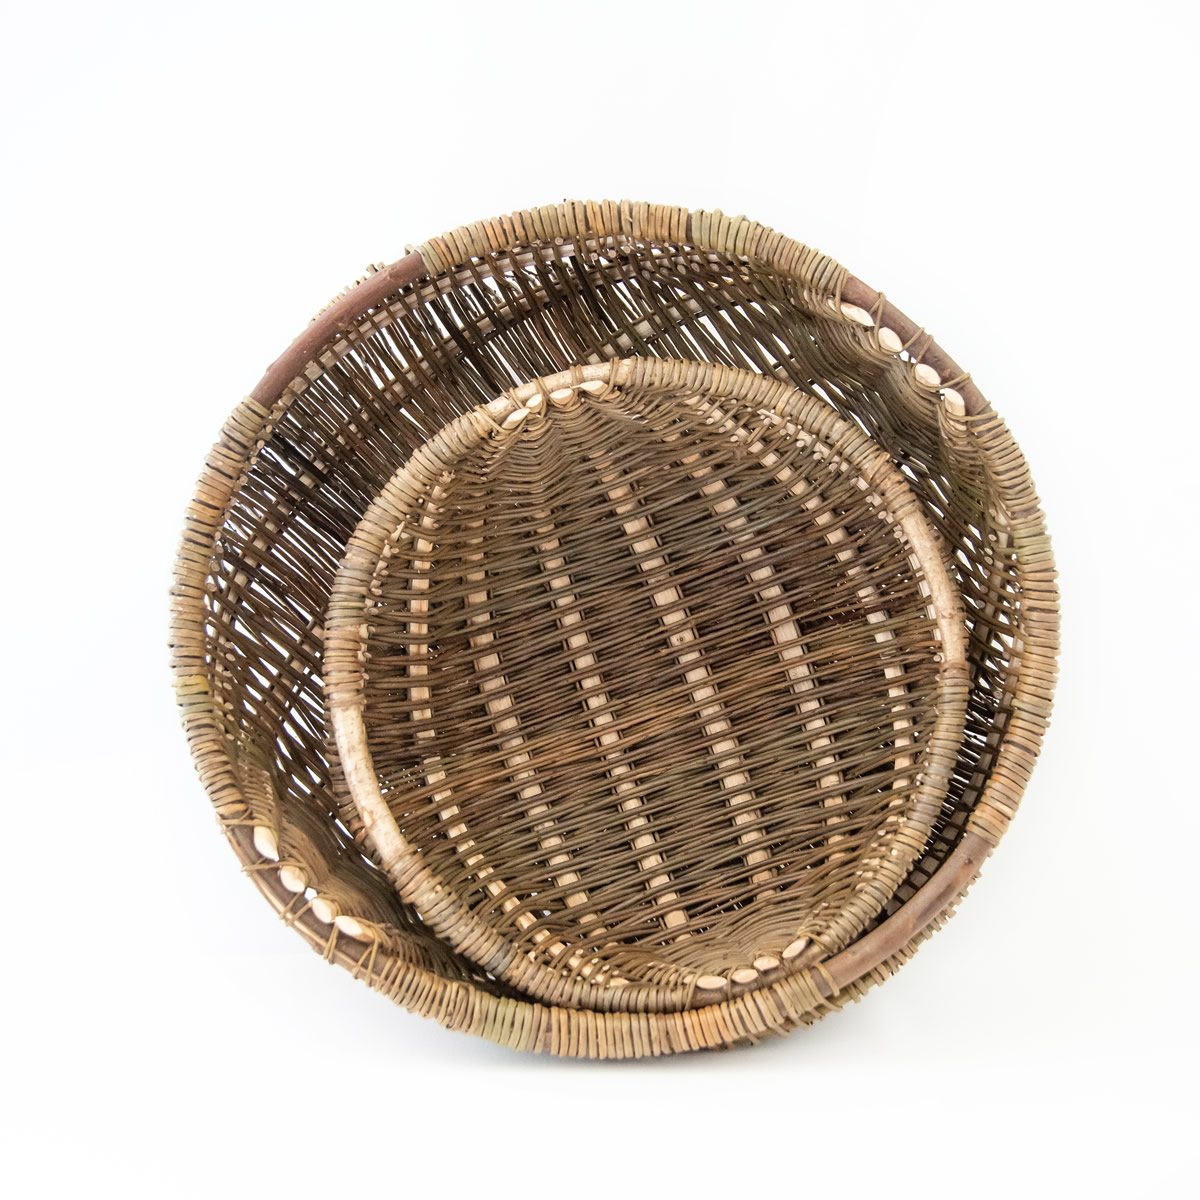 Two wicker baskets on a white background.